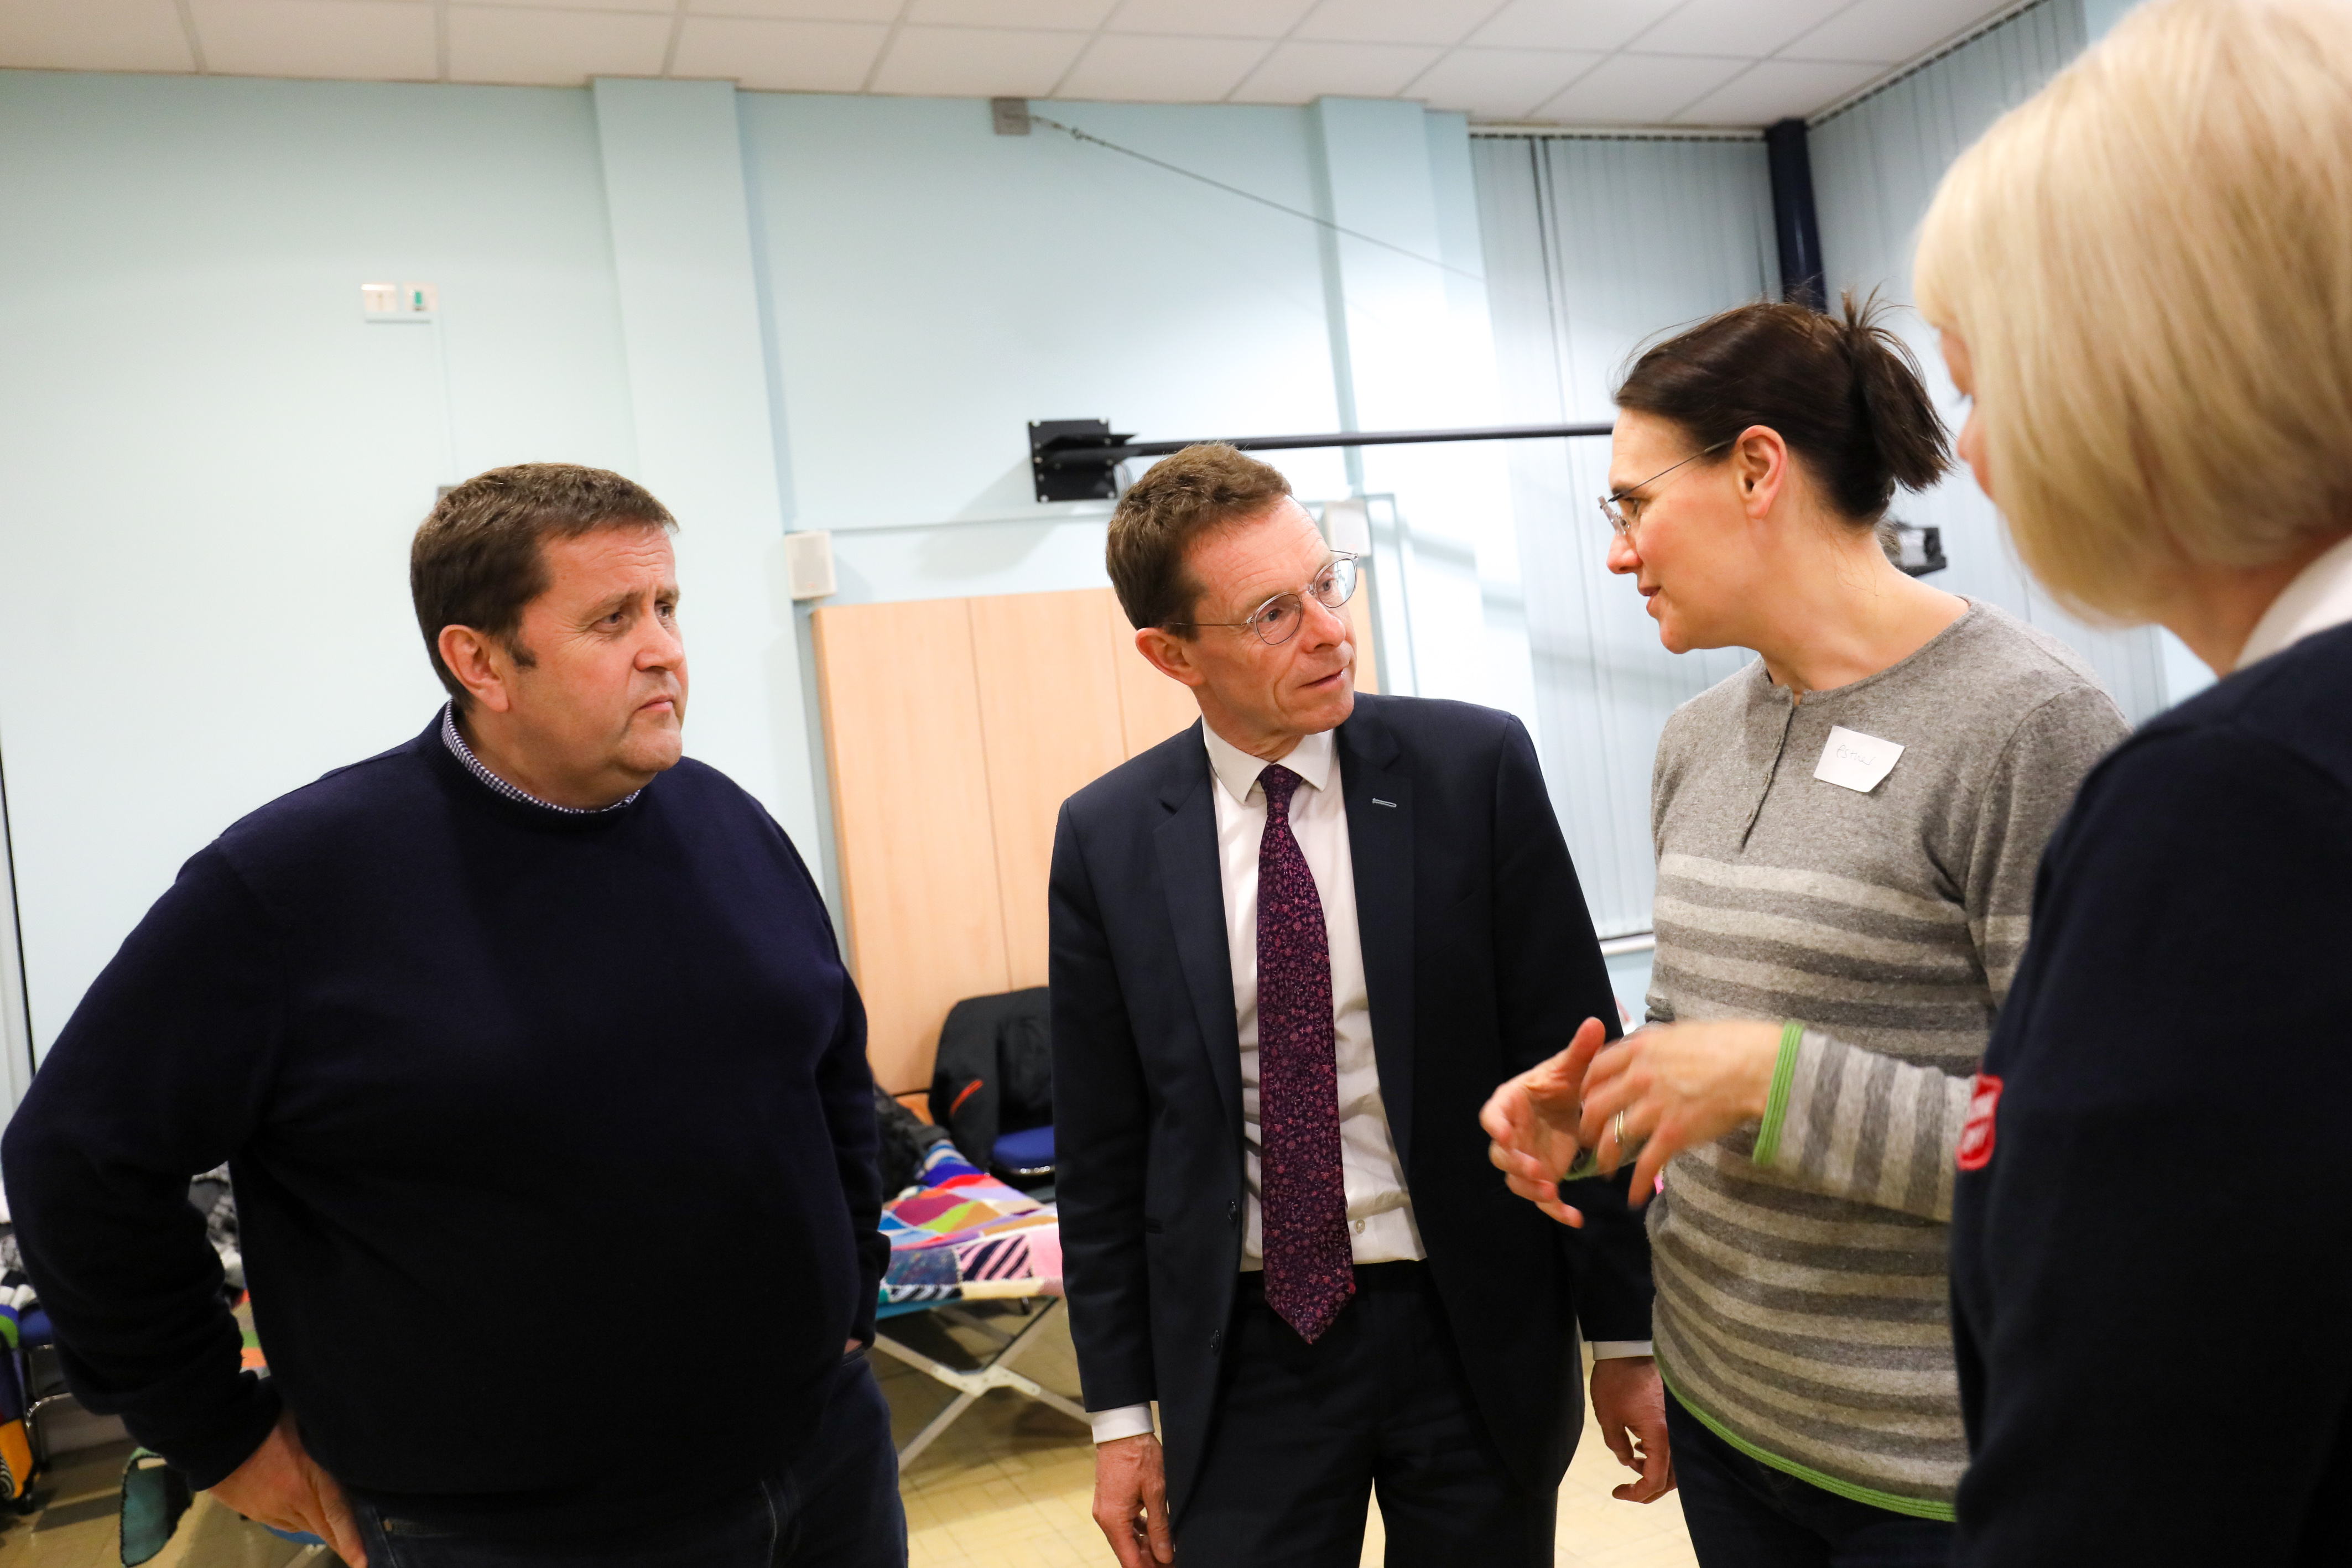 Mayor of the West Midlands Andy Street (second from left) at a recent visit to a night shelter for rough sleepers